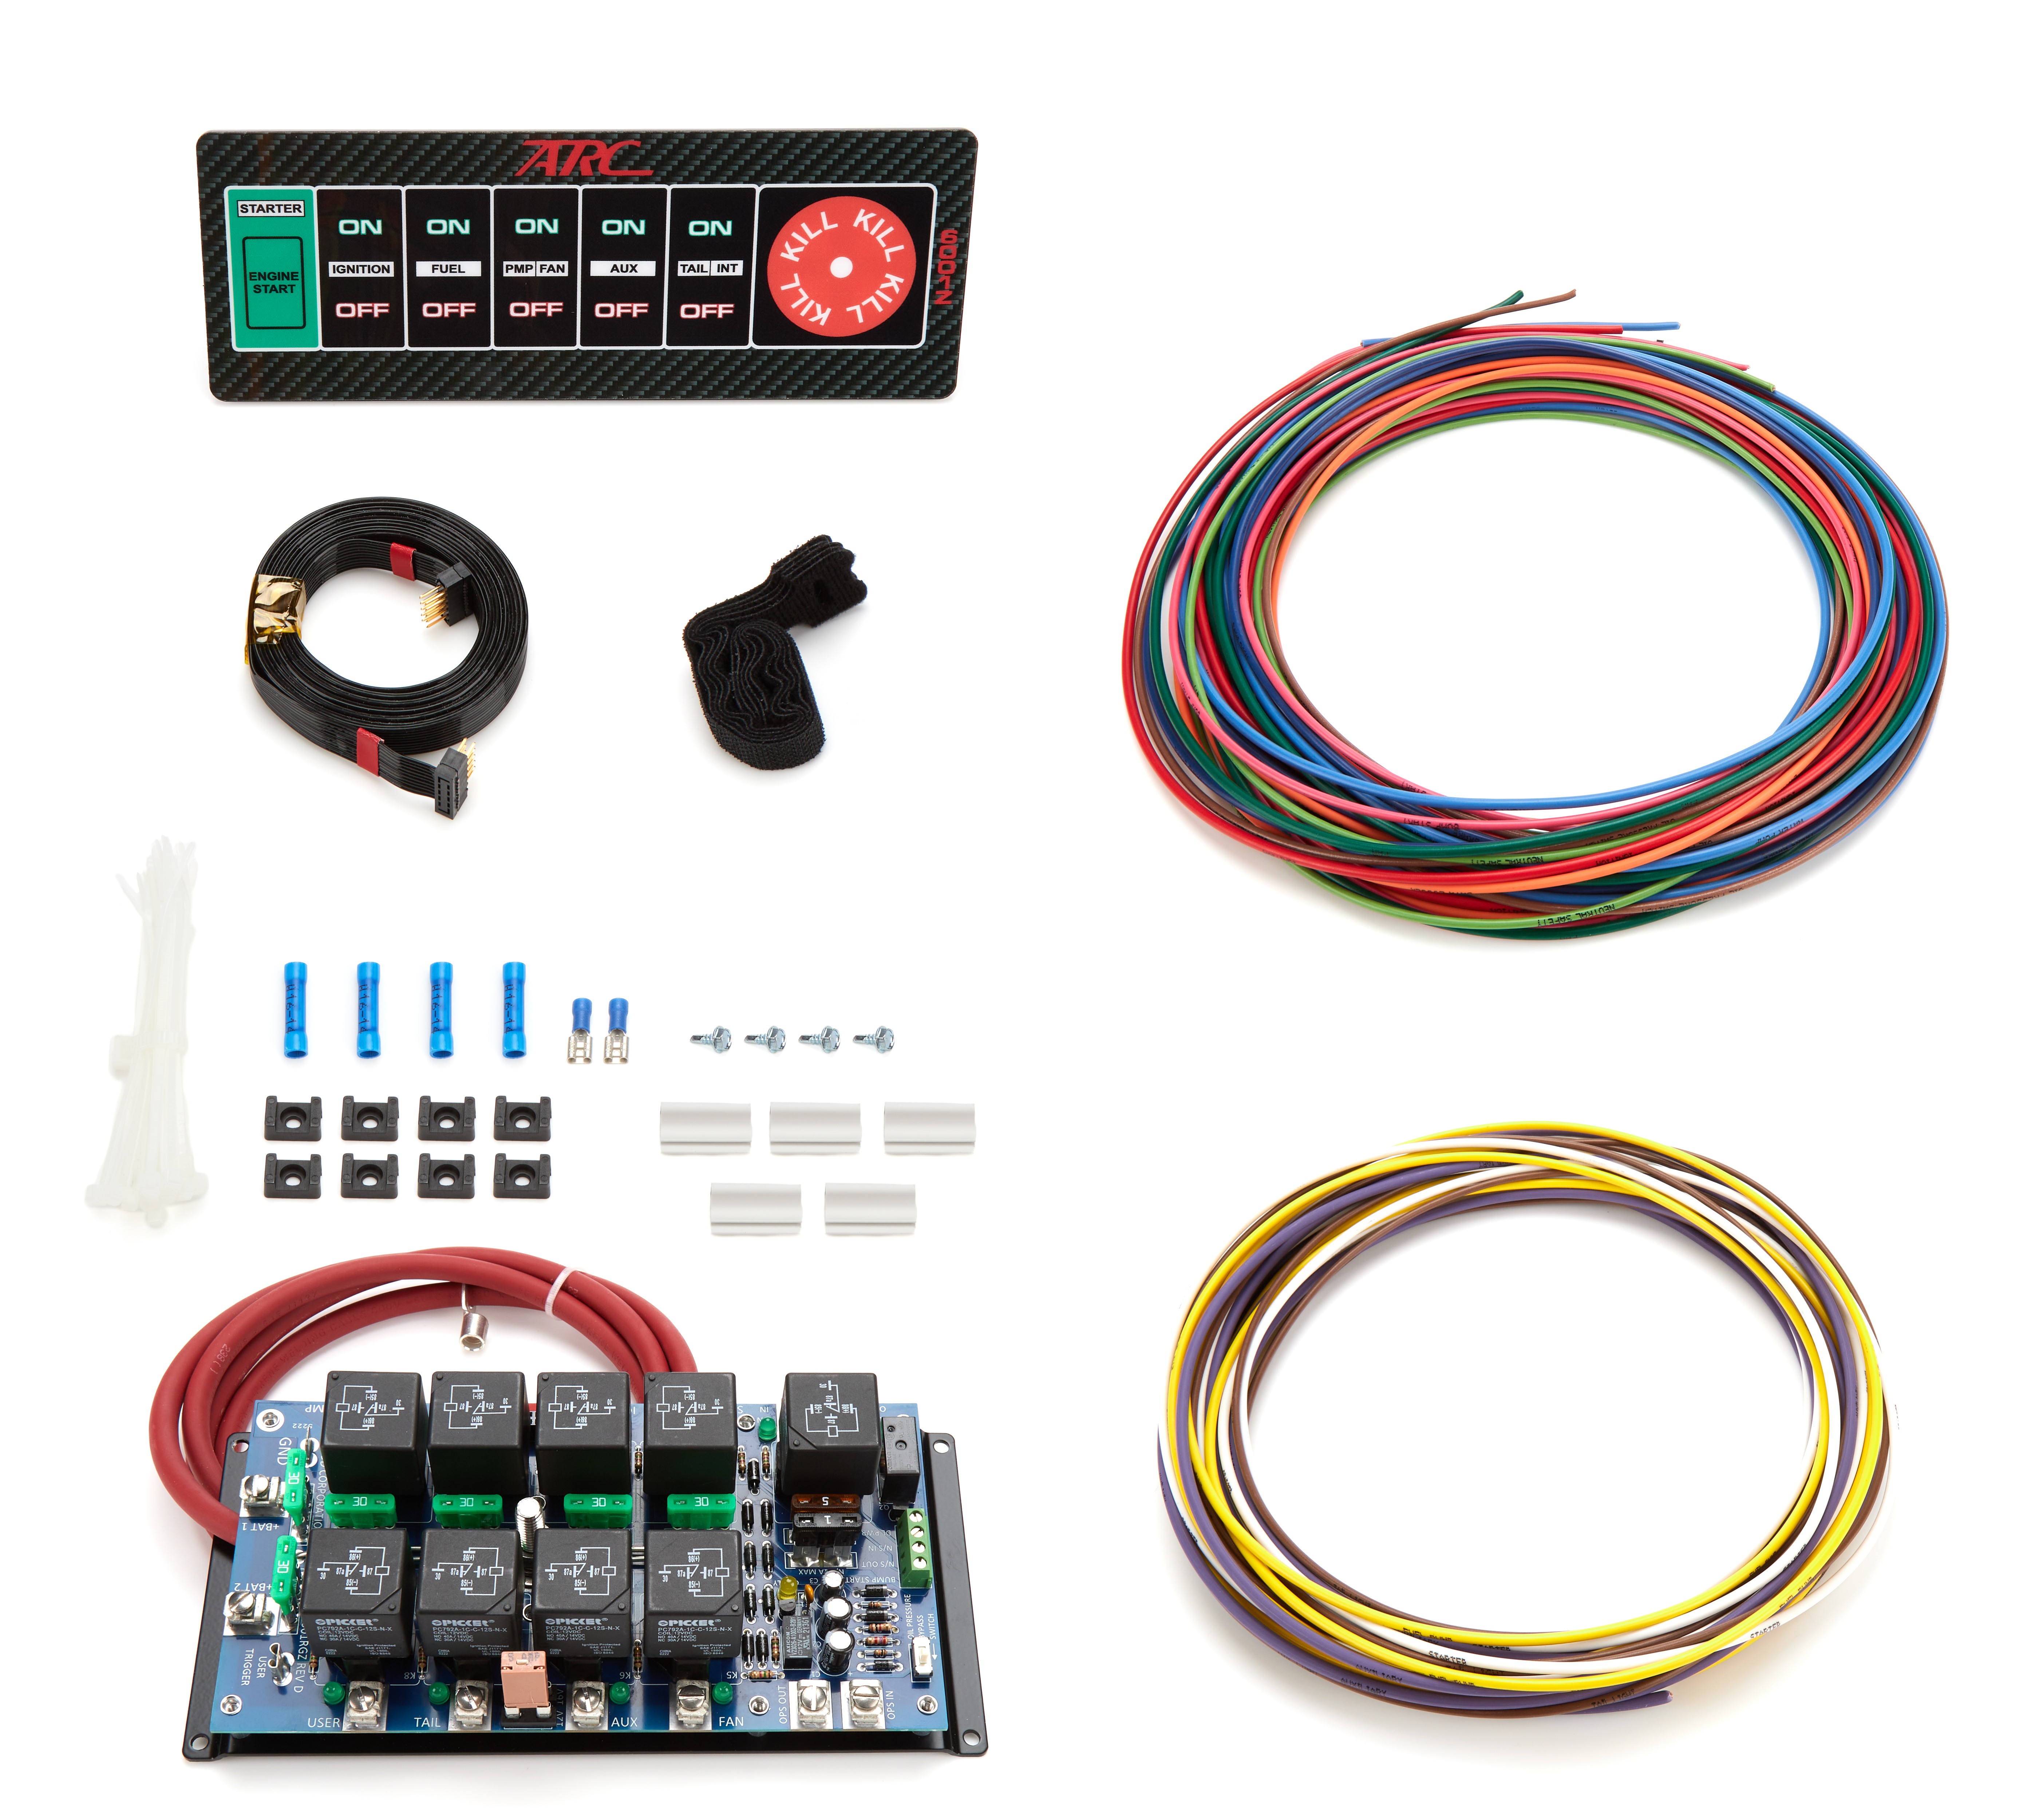 Auto Rod Controls 6001ZD-BL Switch Panel, Dash Mount, 8-3/4 x 3-1/4 in, 7 Flat Switches, Fused, Indicator Lights, Relay Board / Wiring Included, Blue Interior Light, Carbon Fiber Look, Kit